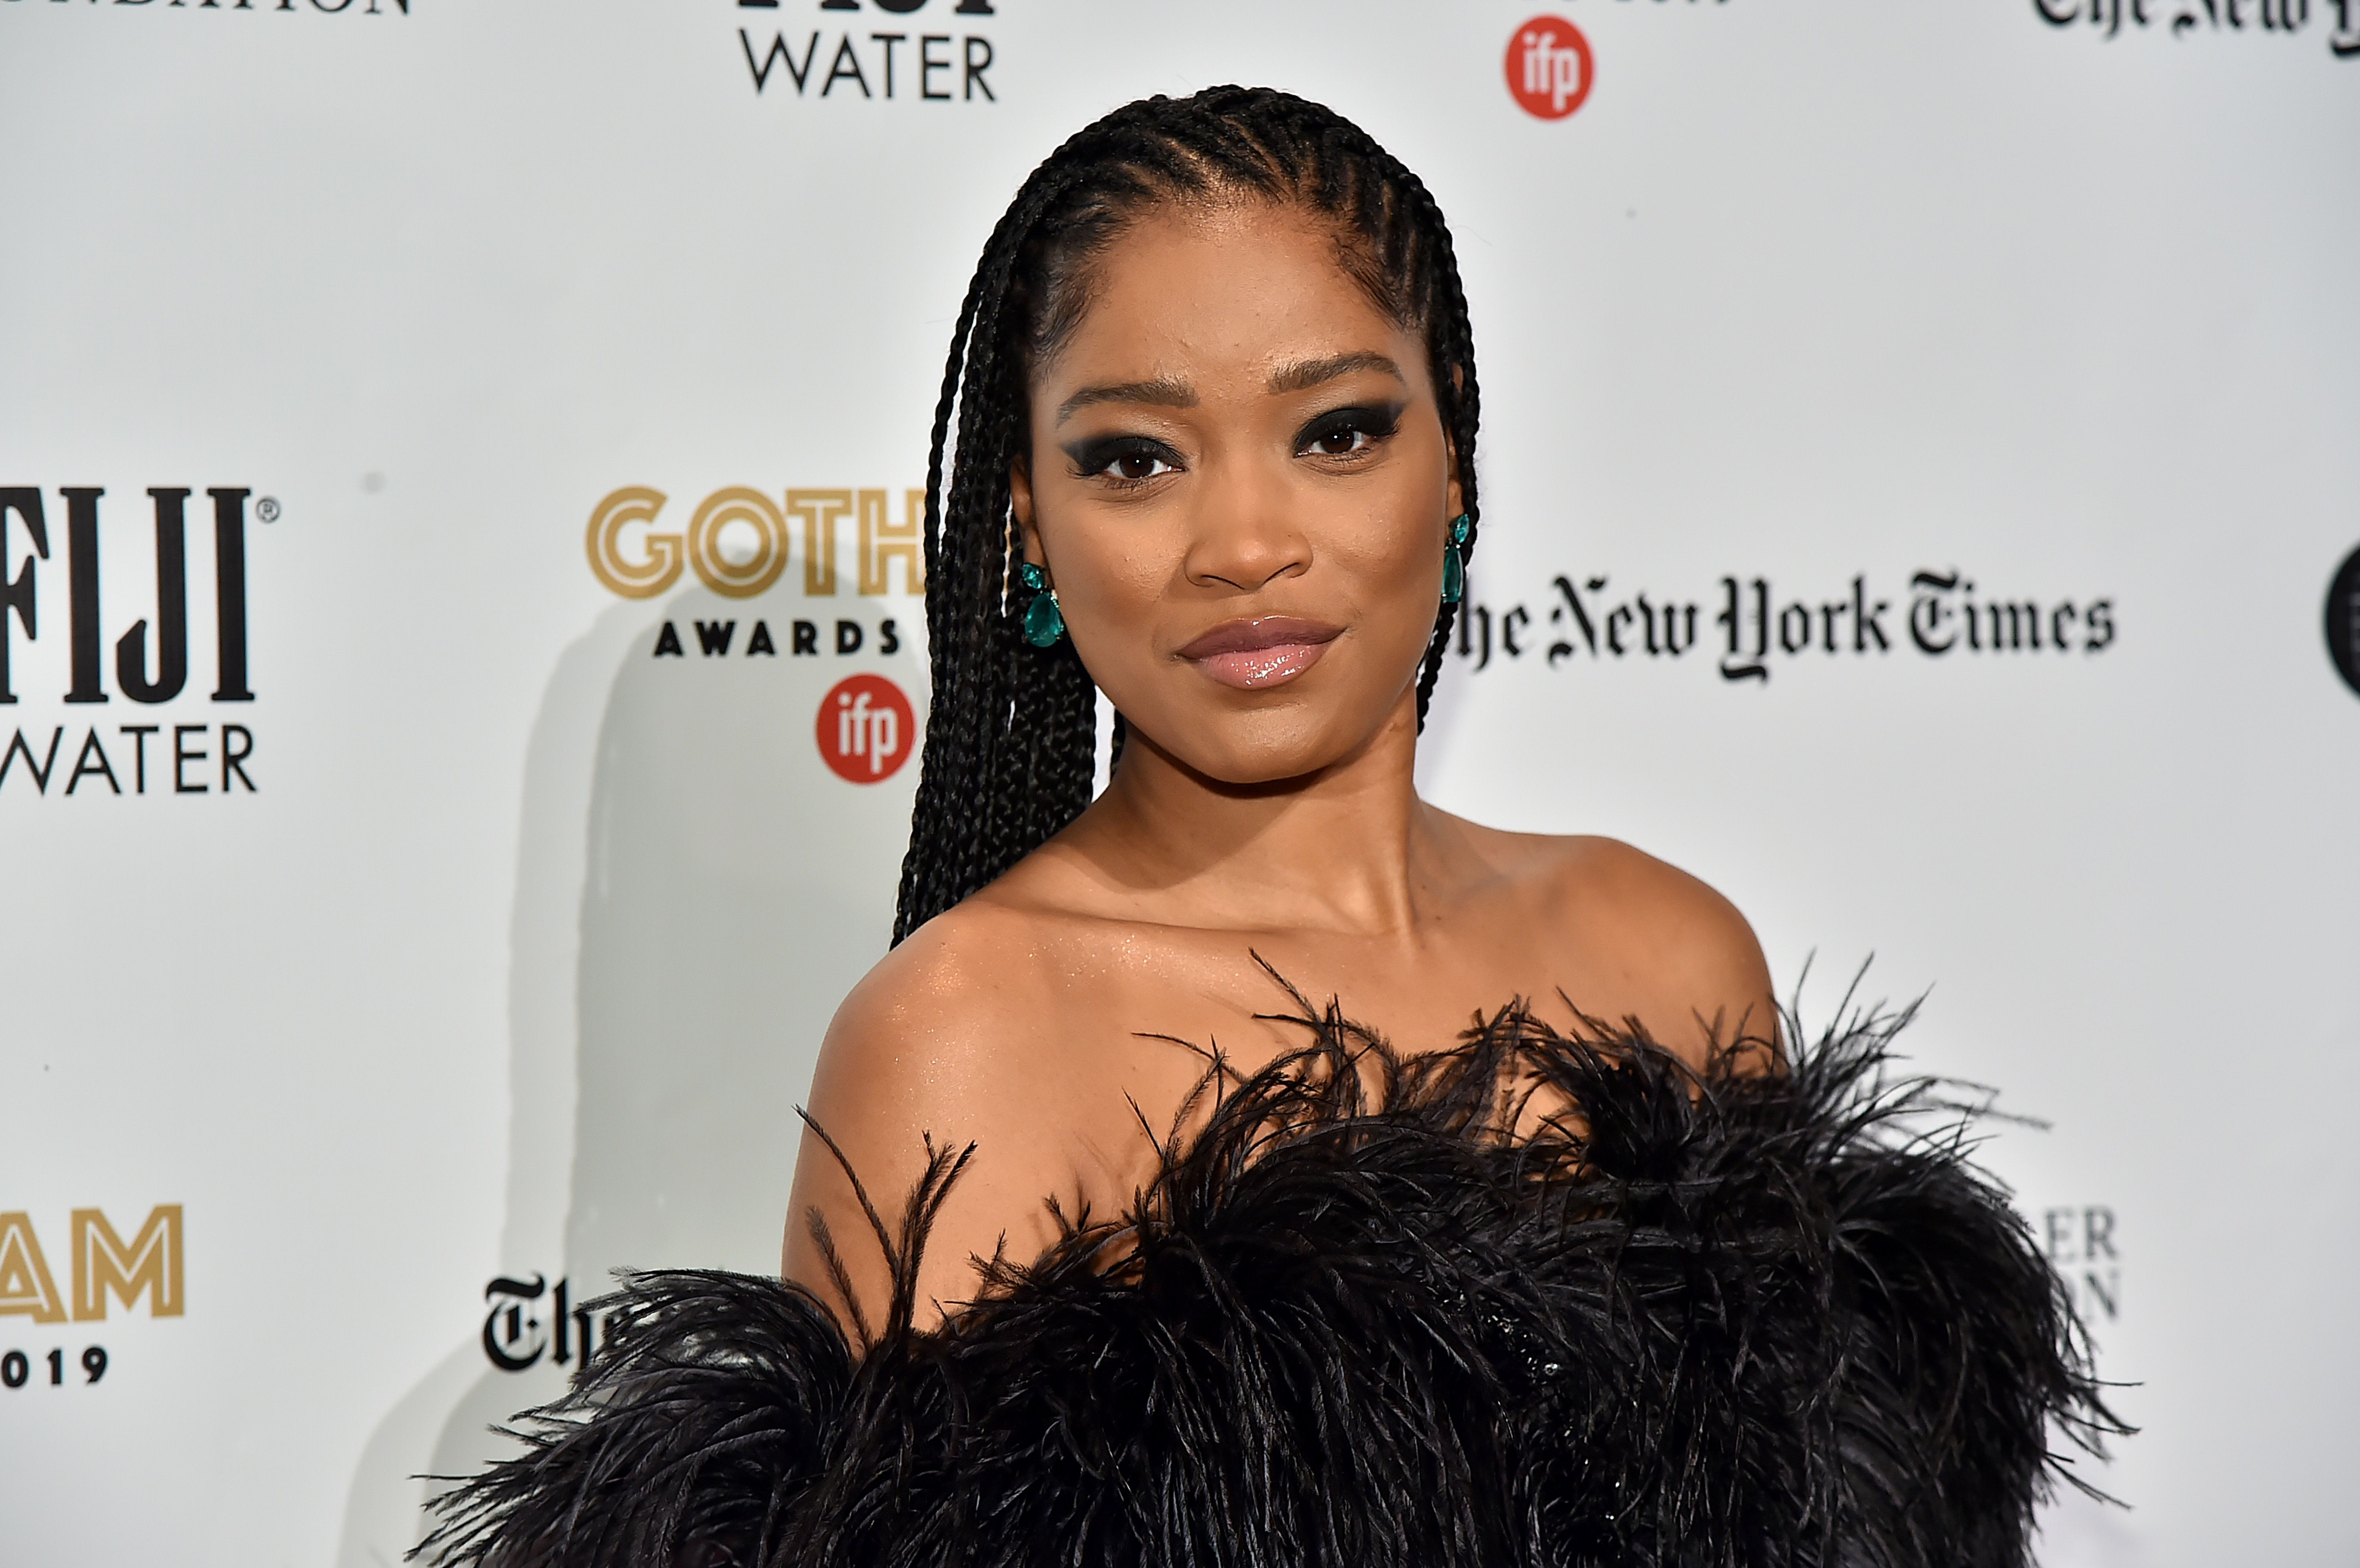 Keke Palmer during the IFP's 29th Annual Gotham Independent Film Awards at Cipriani Wall Street on December 02, 2019, in New York City. | Source: Getty Images